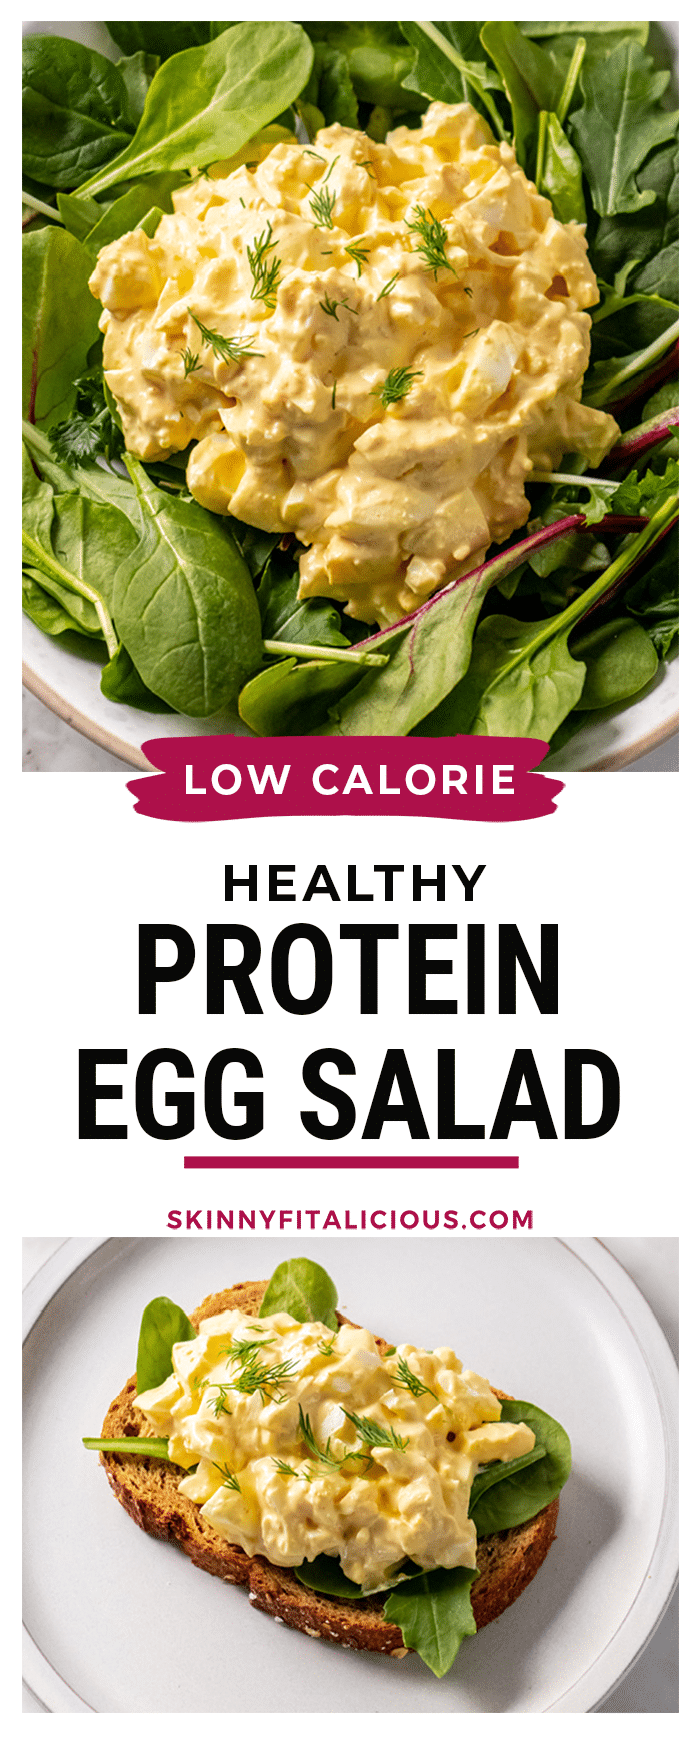 High Protein Egg Salad is creamy, fresh and packed with flavor! Made lower calorie from traditional egg salad recipes by using Greek yogurt and adding more egg whites.